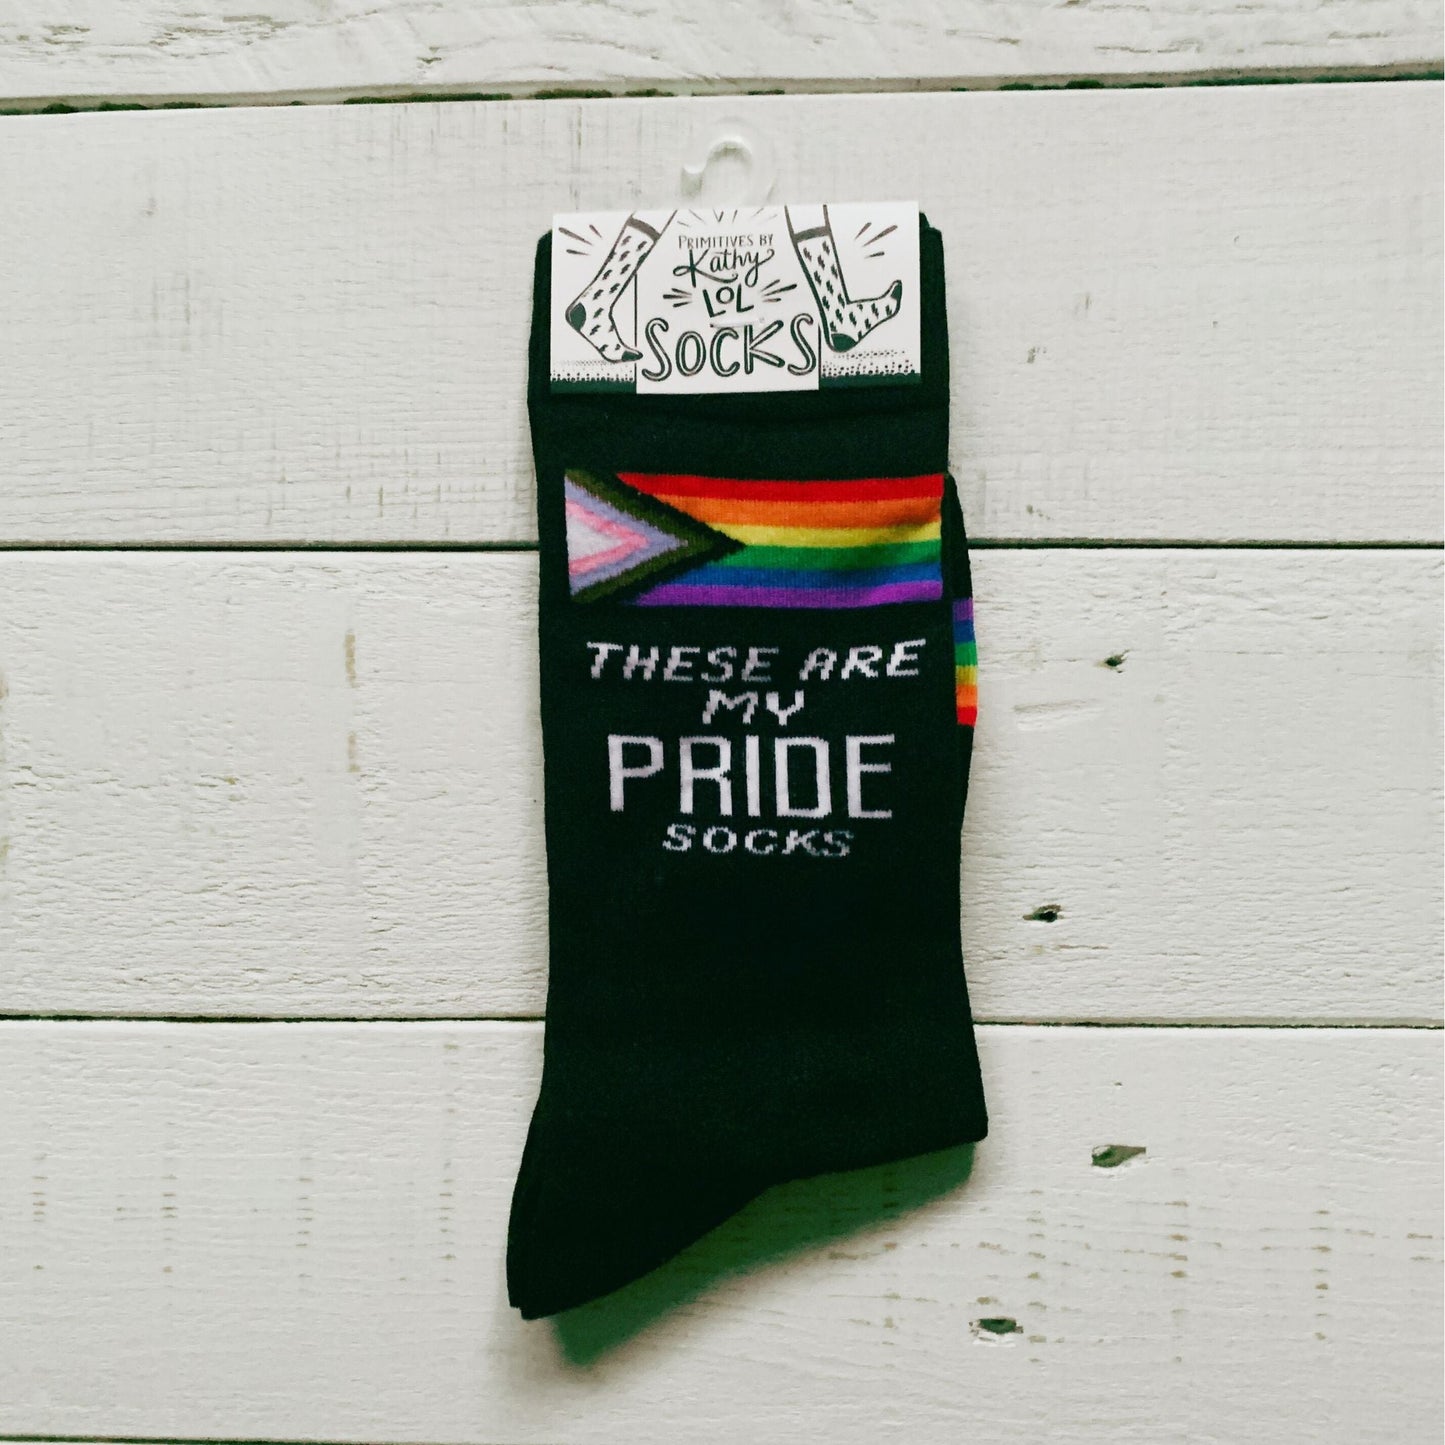 These Are My Pride Socks | Funny Novelty Socks with Cool Design | Bold/Crazy/Unique Dress Socks